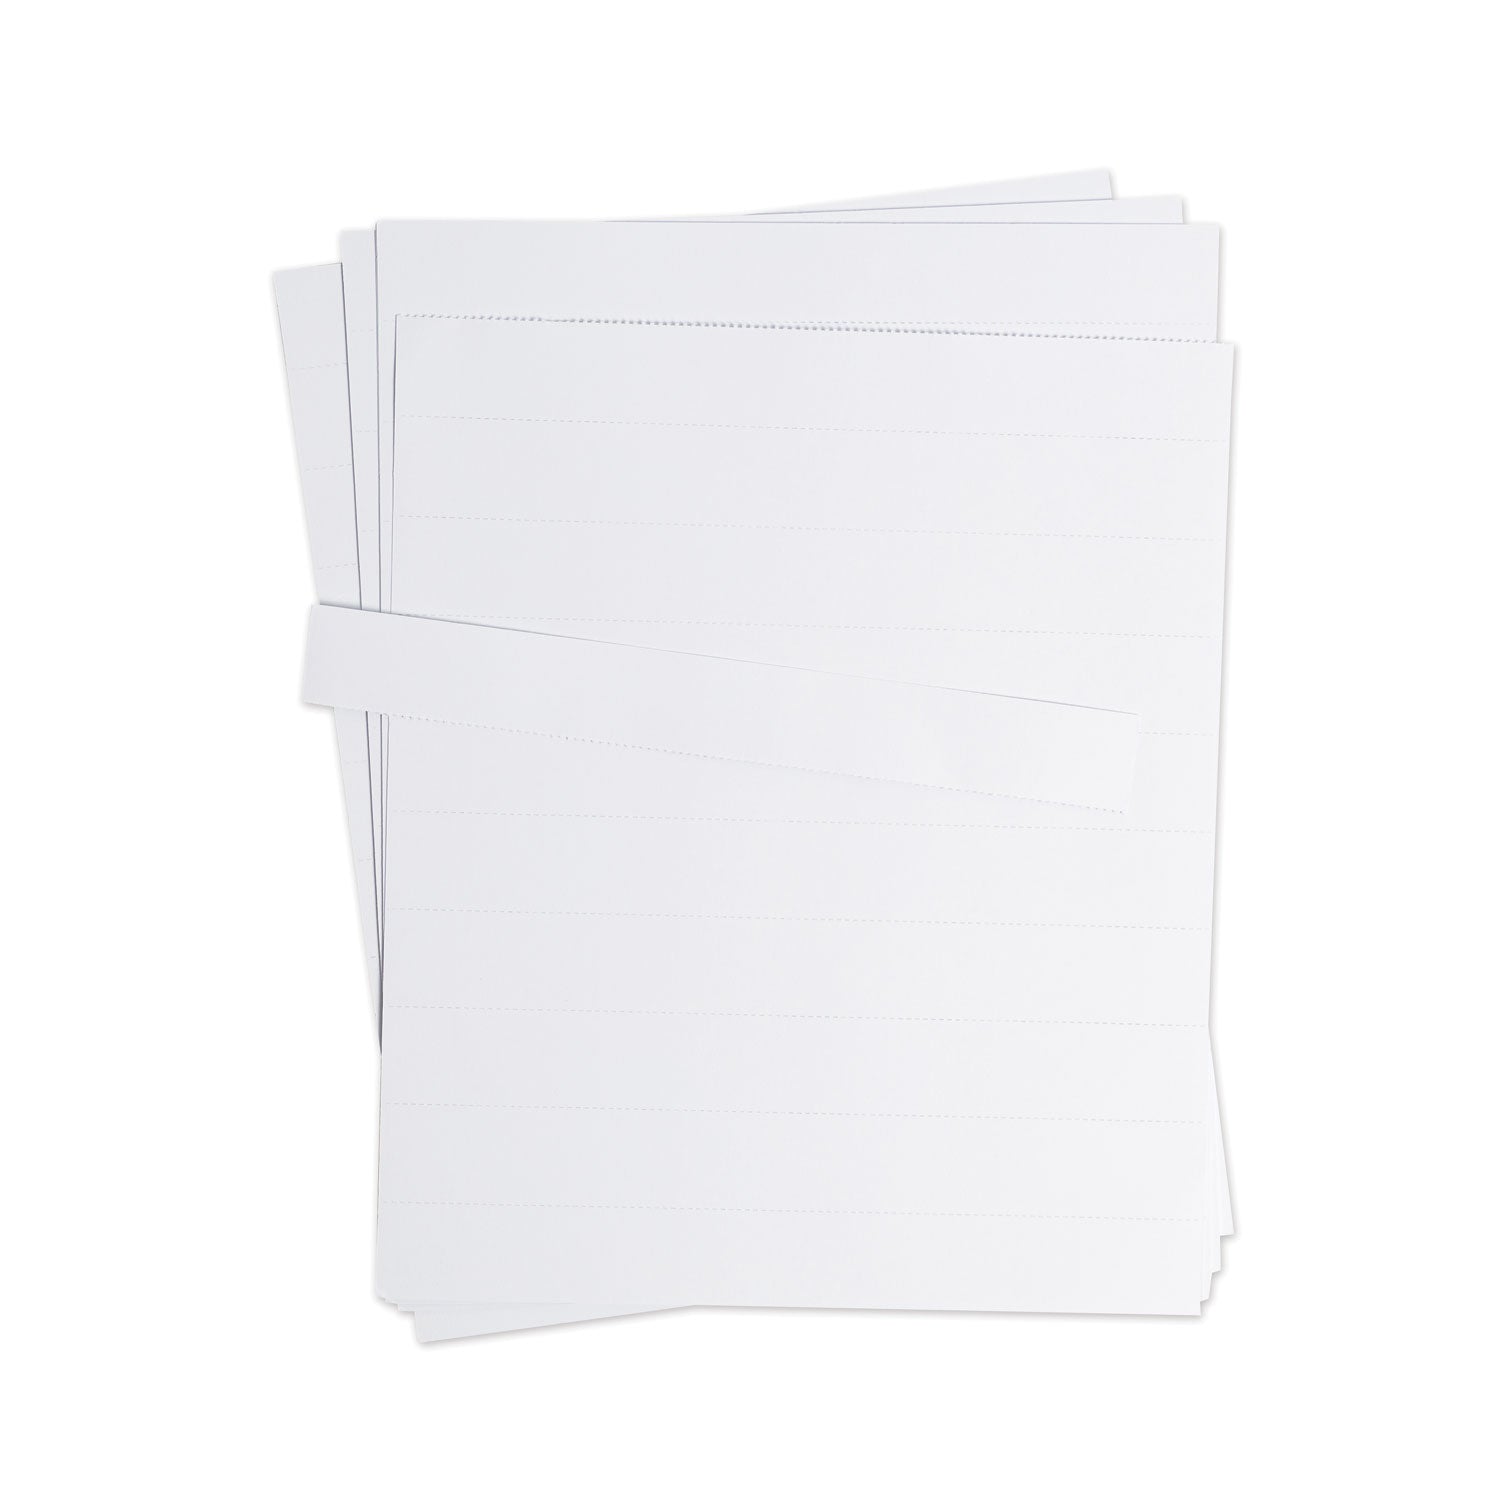 data-card-replacement-sheet-85-x-11-sheets-perforated-at-1-white-10-pack_ubrfm1615 - 1